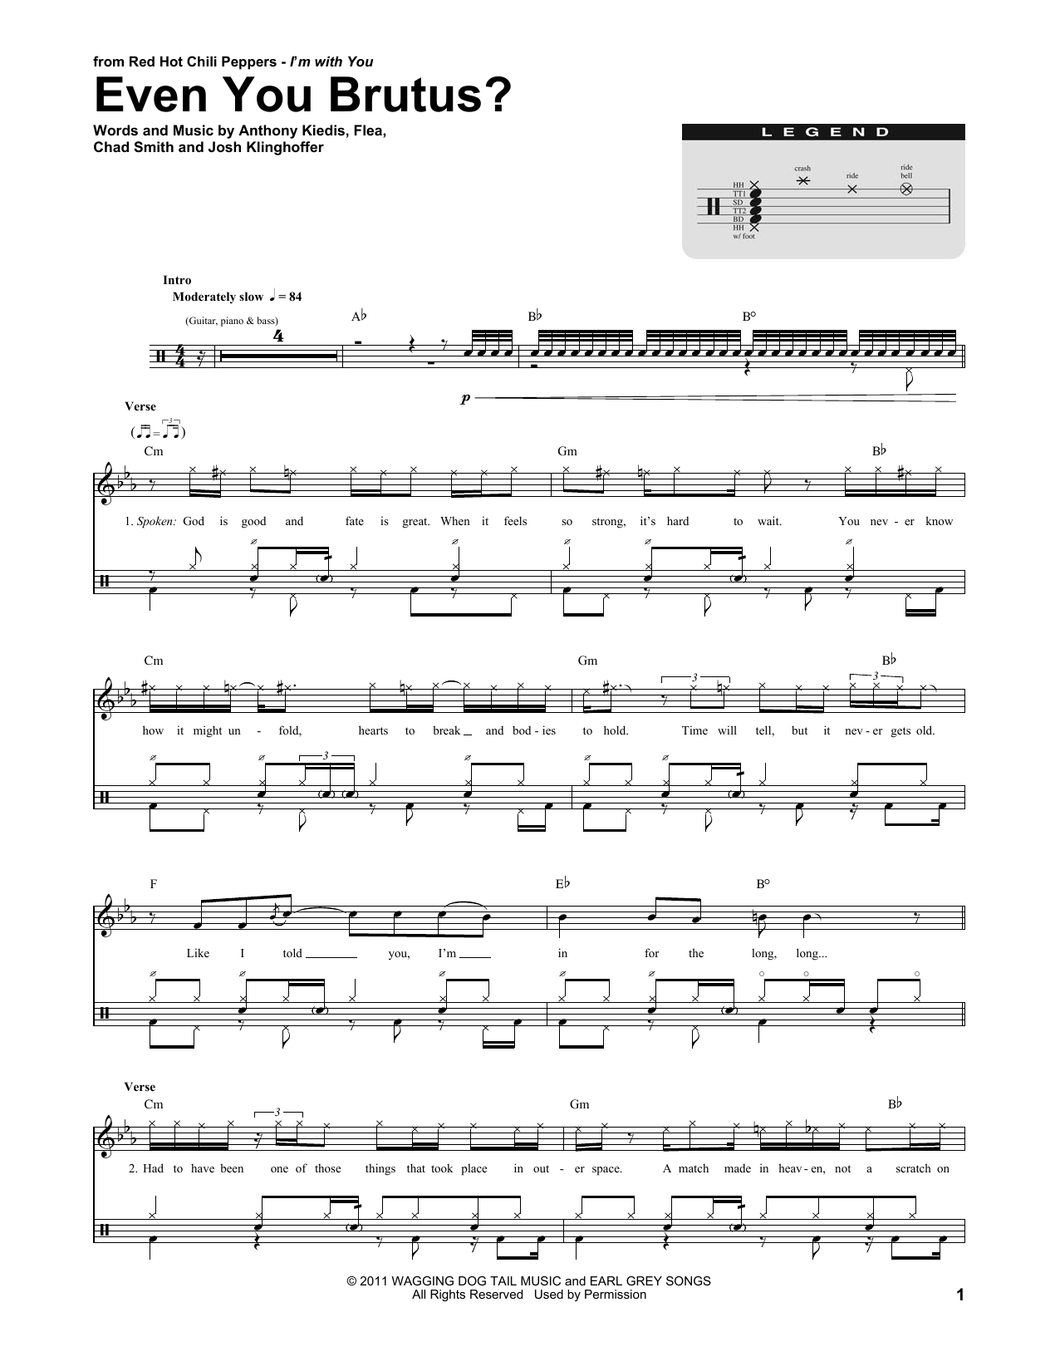 Even You Brutus? - Red Hot Chili Peppers - Full Drum Transcription / Drum Sheet Music - SheetMusicDirect DT